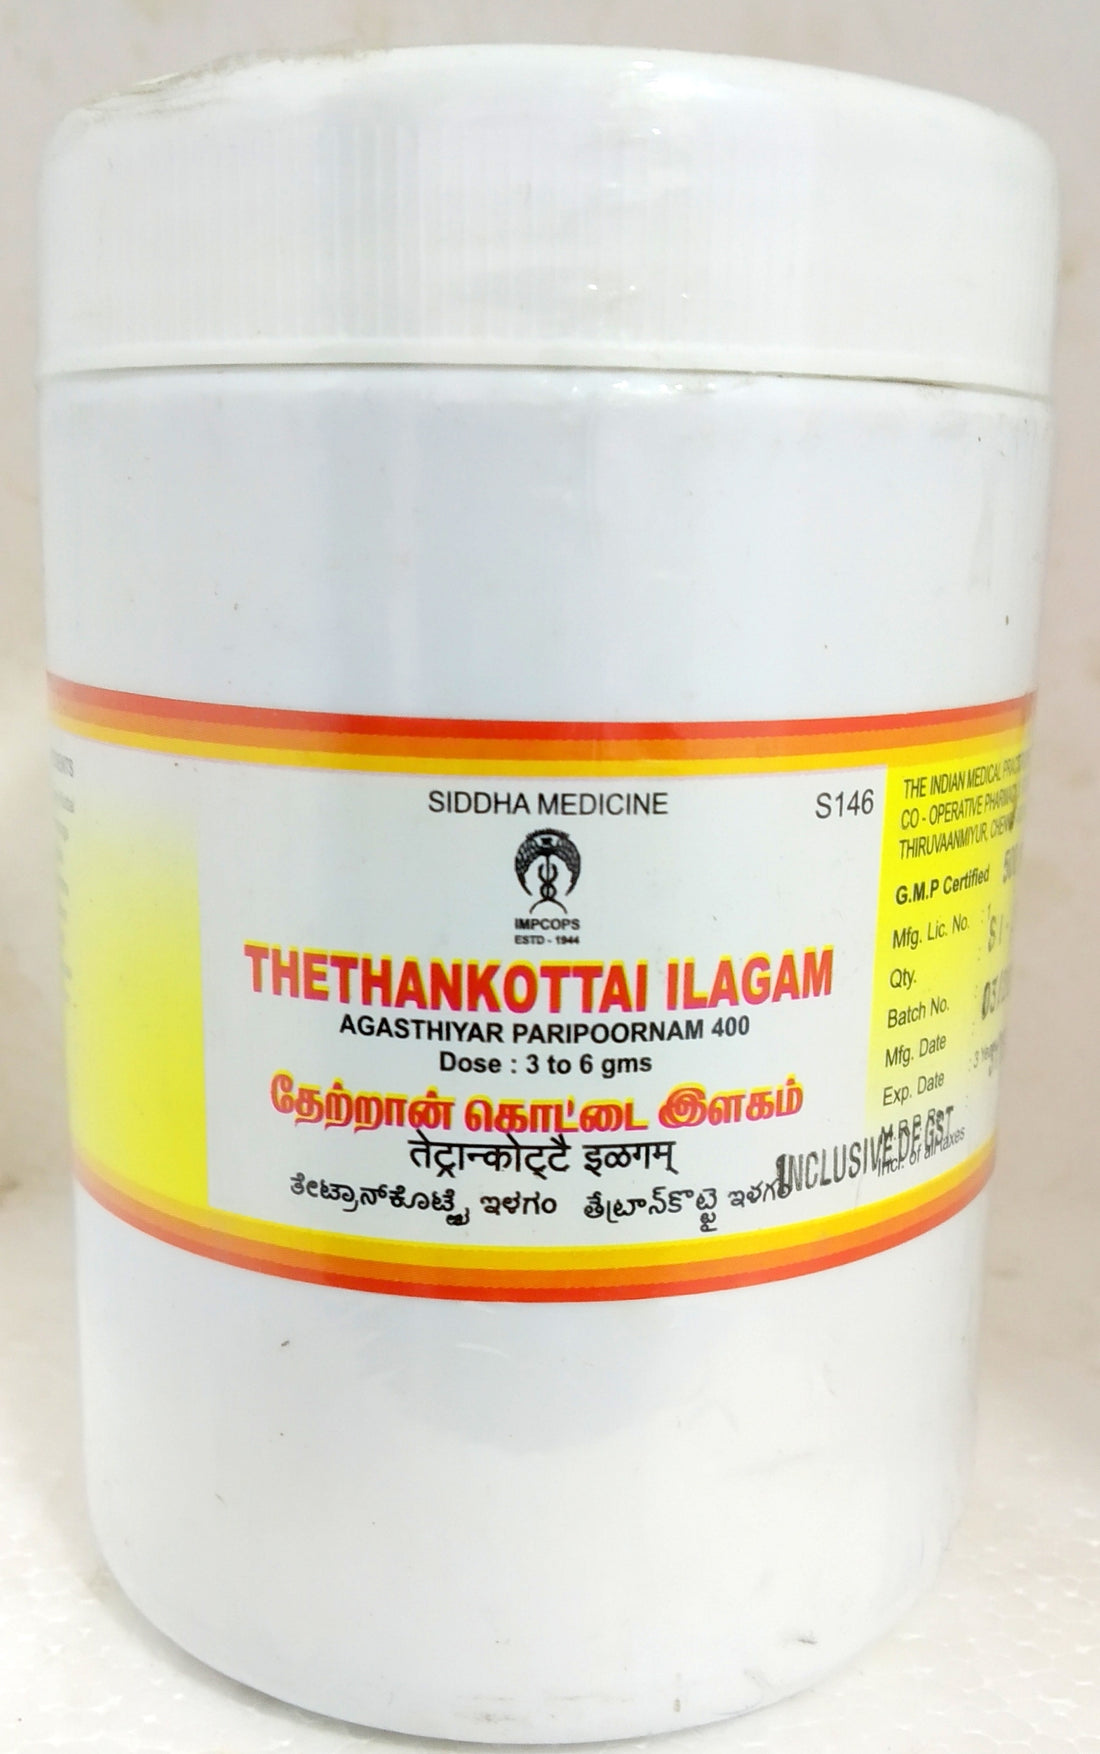 Shop Impcops Thetrankottai Lehyam 500gm at price 372.00 from Impcops Online - Ayush Care